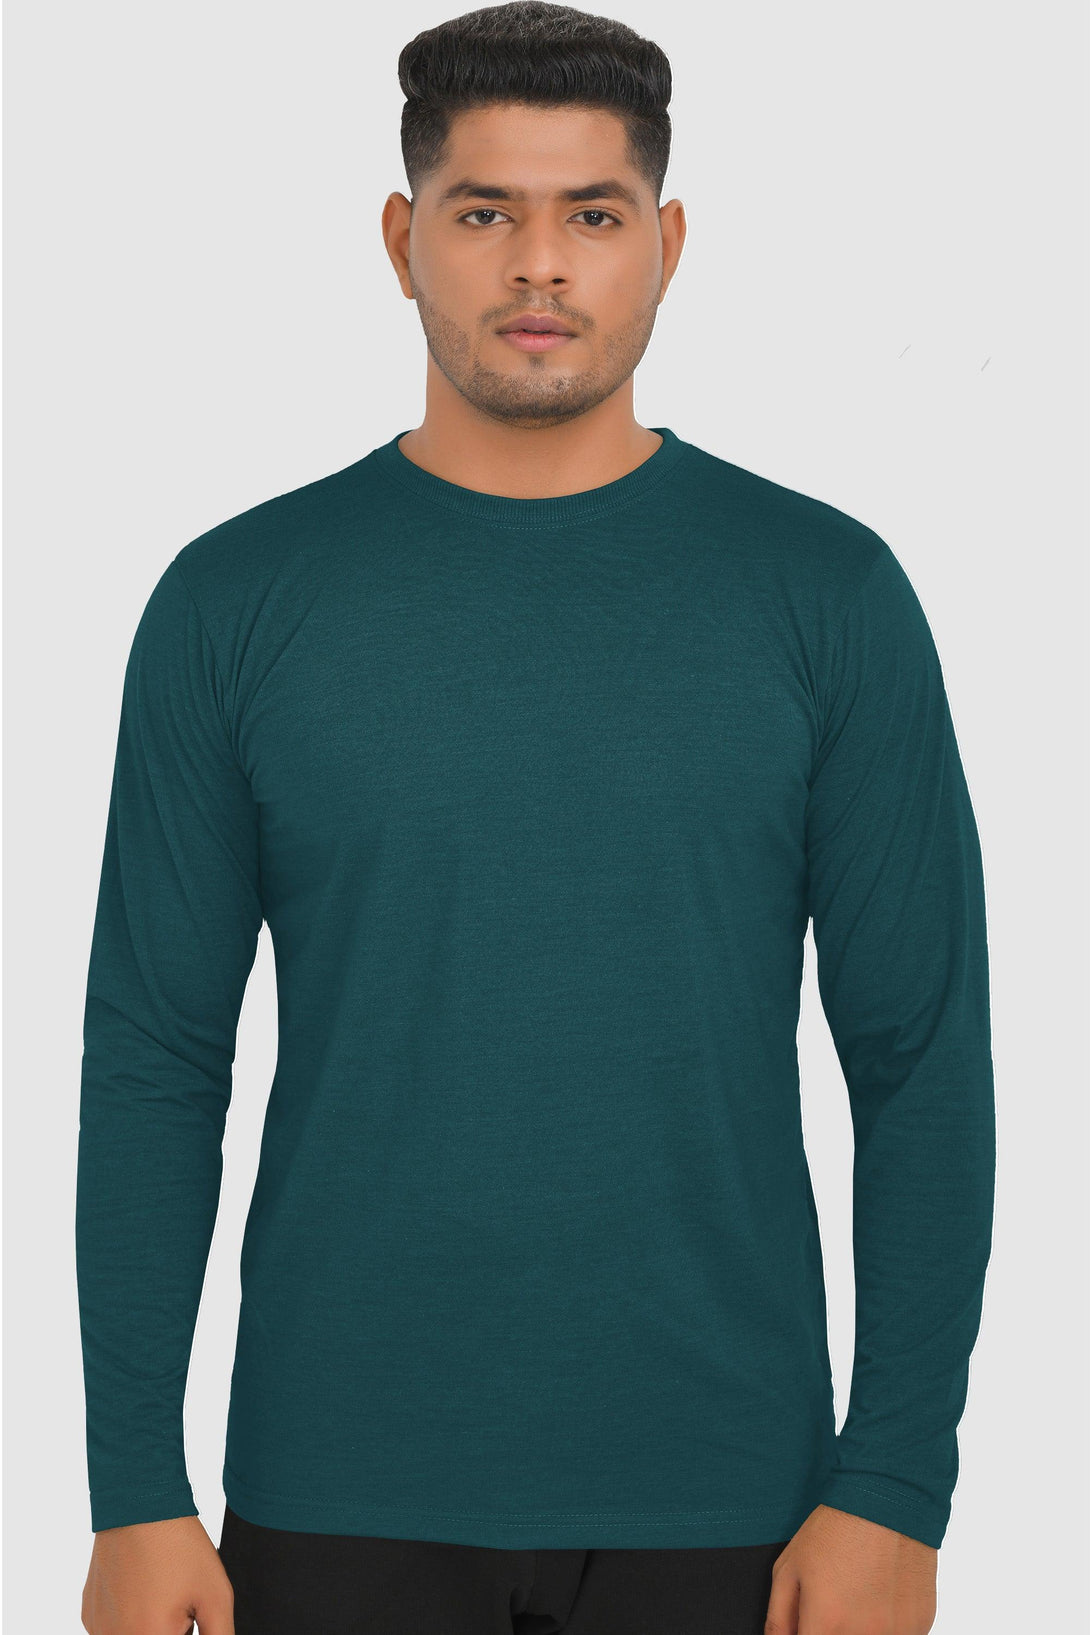 Long Sleeve Round Neck T-Shirts | FOREST GREEN - BLACK - MAROON - NAVY - FTS